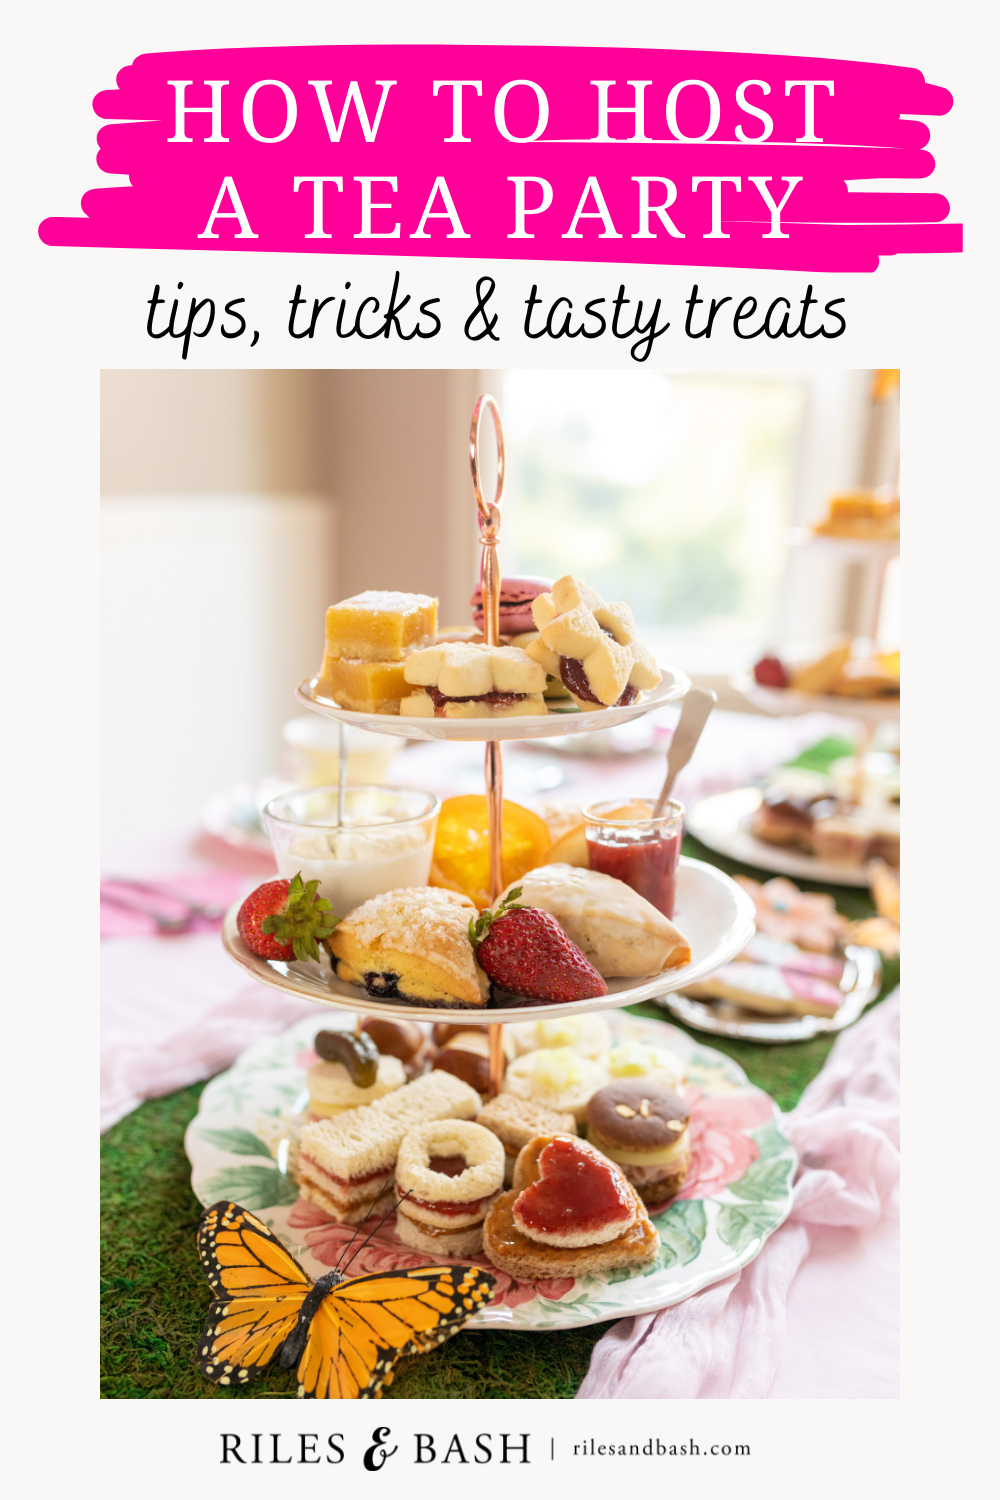 How to Host a Tea Party ~ Tips, Tricks and Tasty Treats_Riles & BashHow to Host a Tea Party ~ Tips, Tricks and Tasty Treats